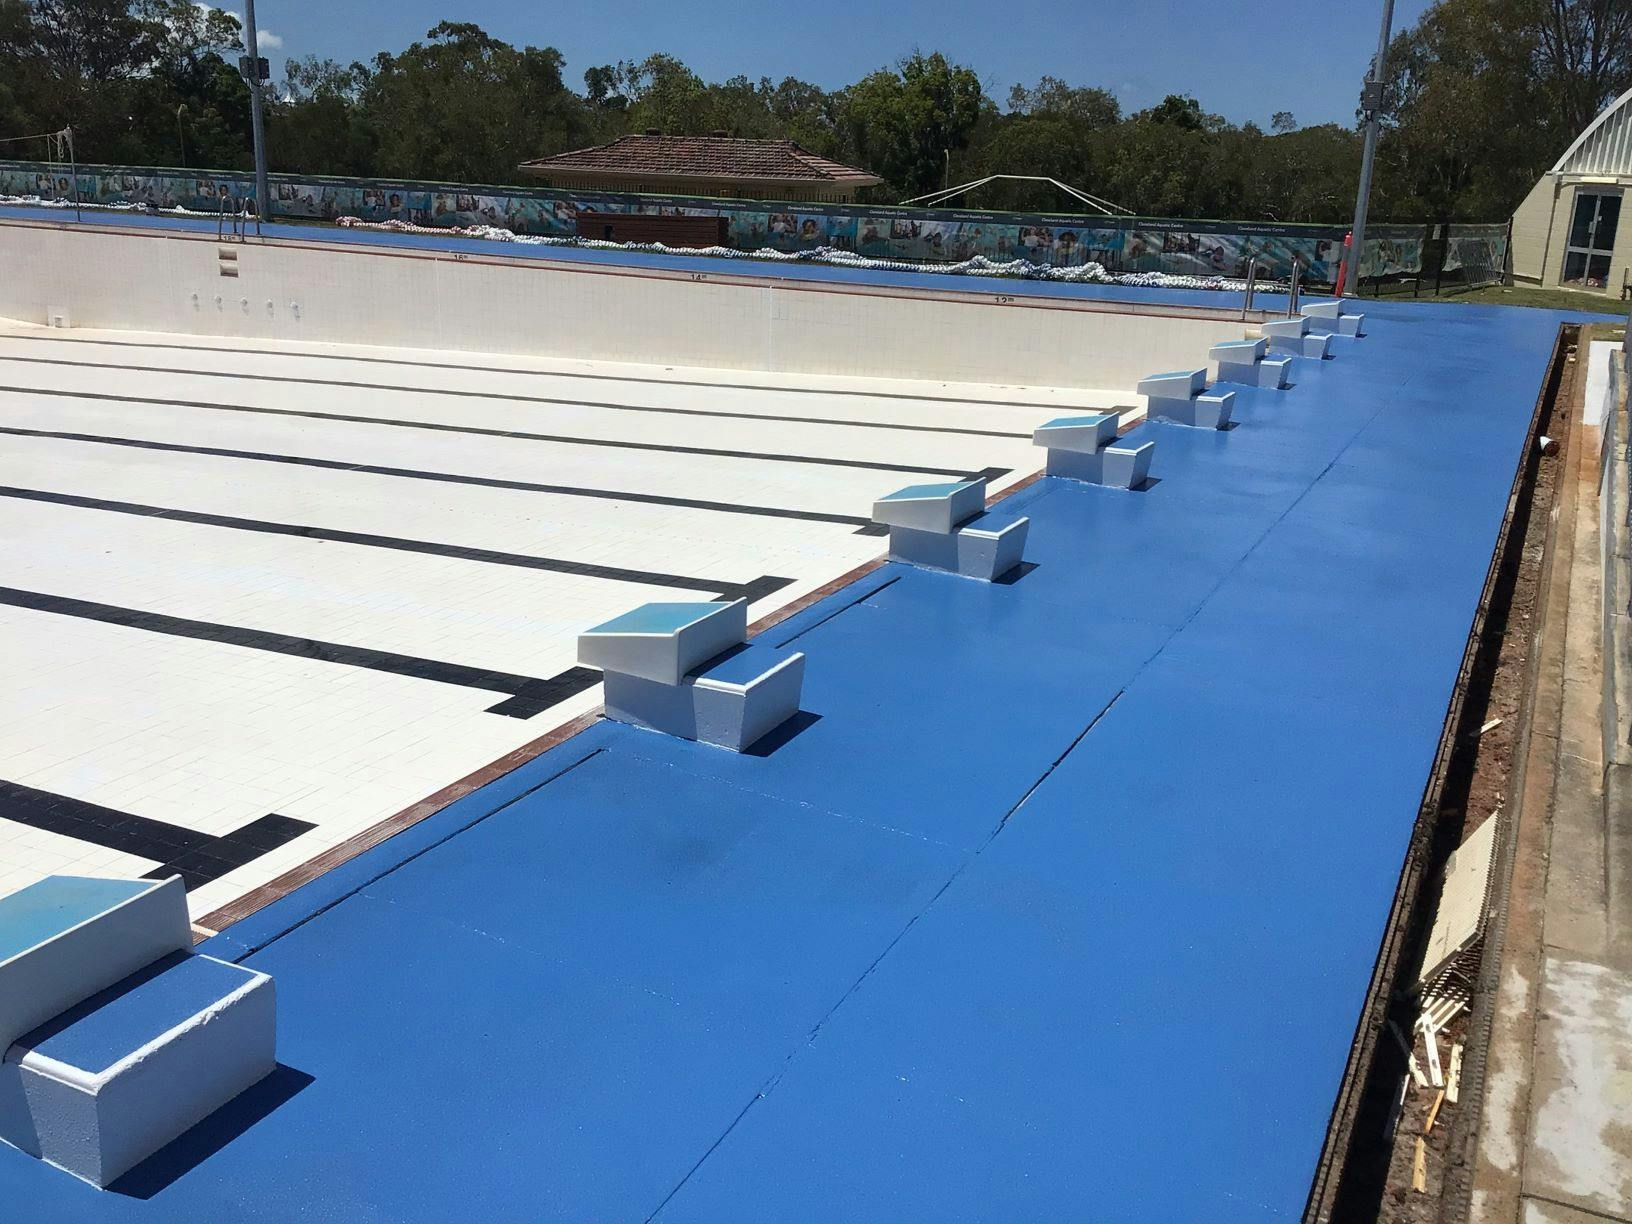 Newly completed  50 m  pool concourse and starter blocks